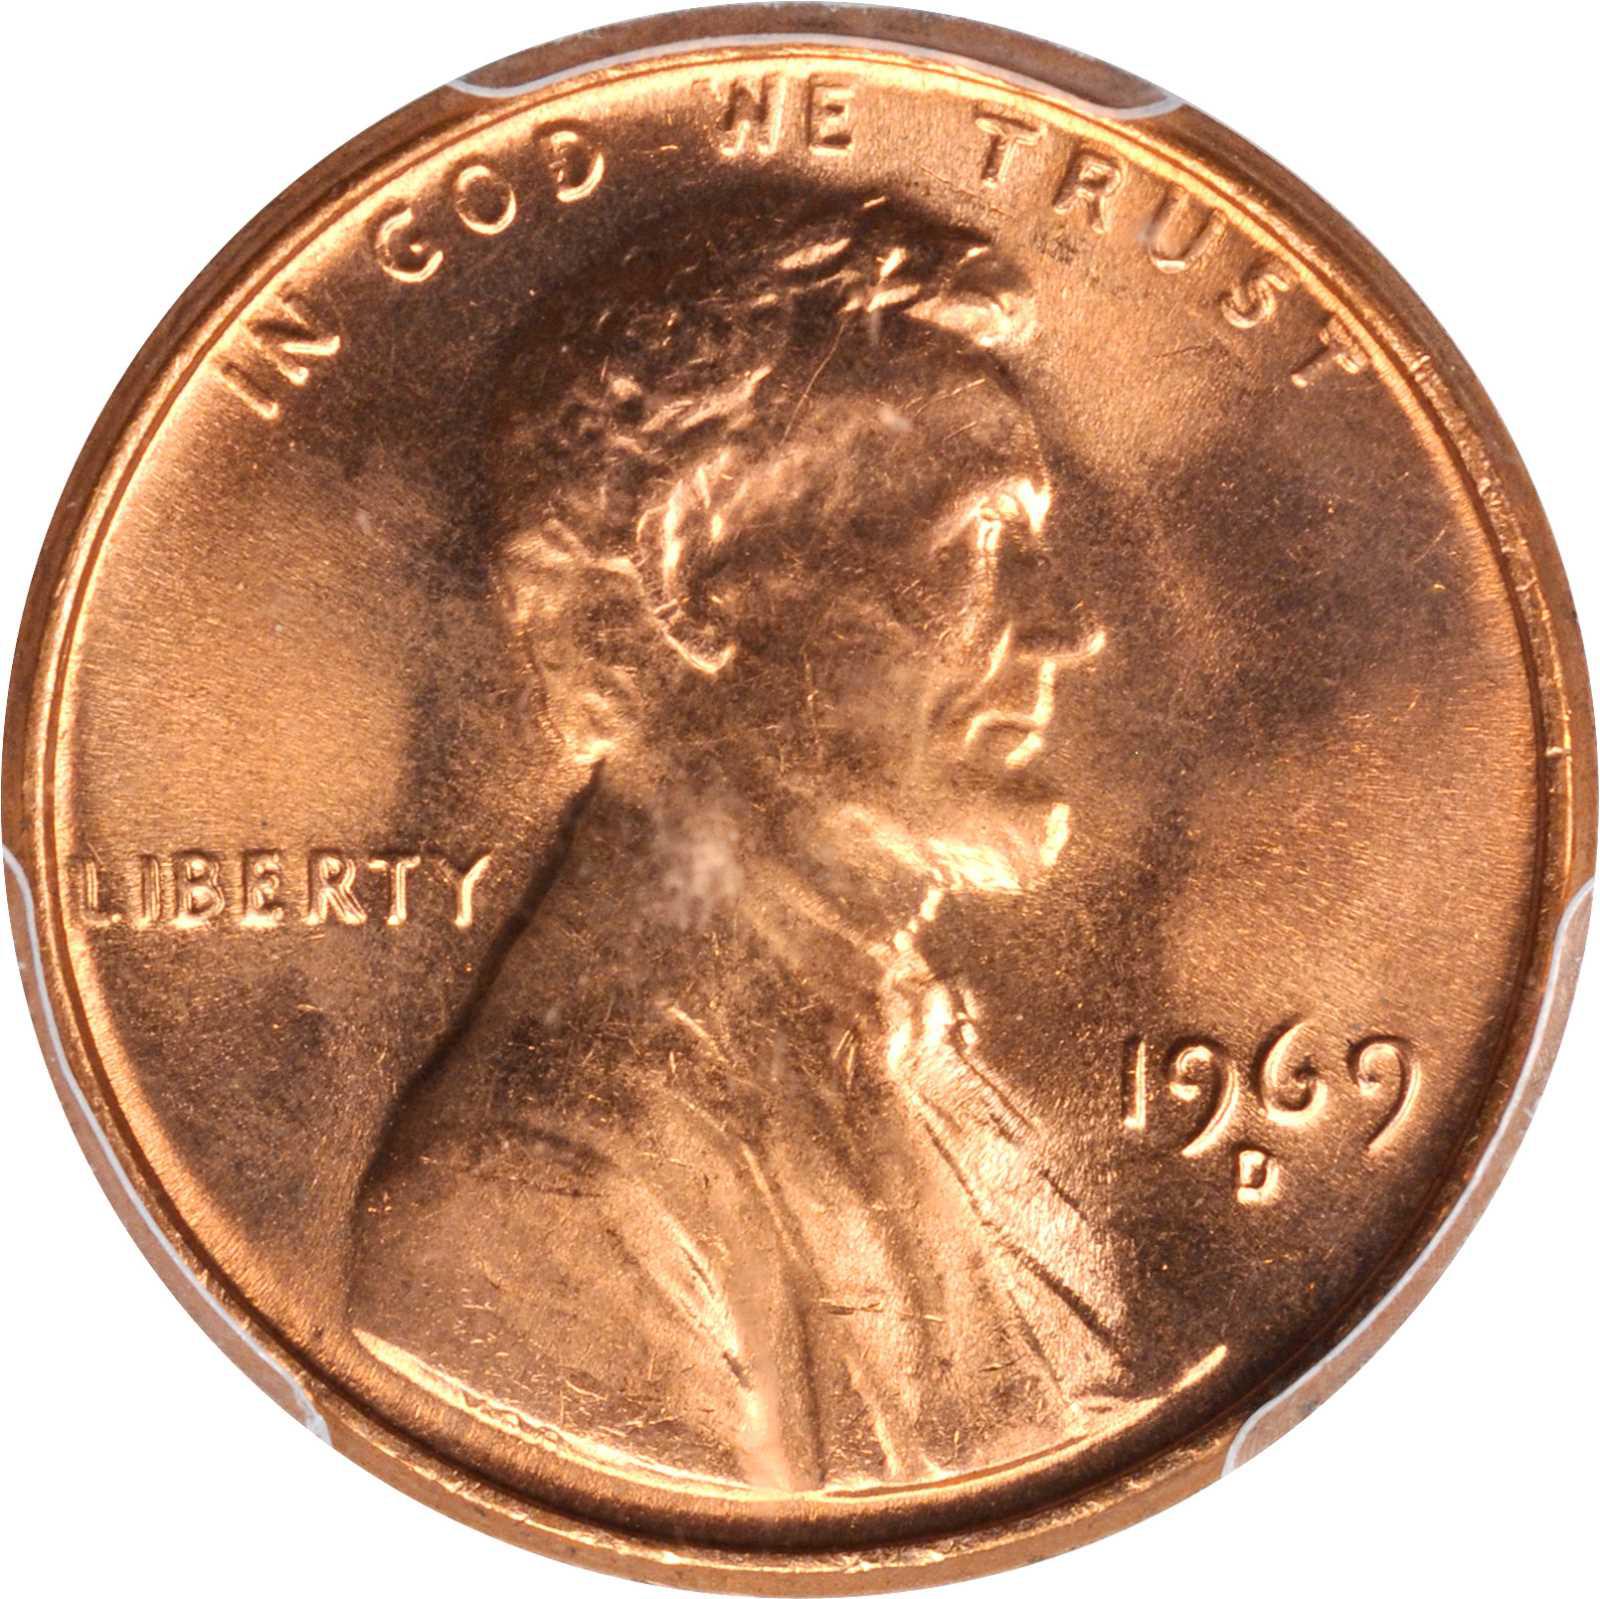 Value Of 1969 D Lincoln Cents We Appraise Modern Coins,Vegetarian Chinese Food Recipes With Pictures